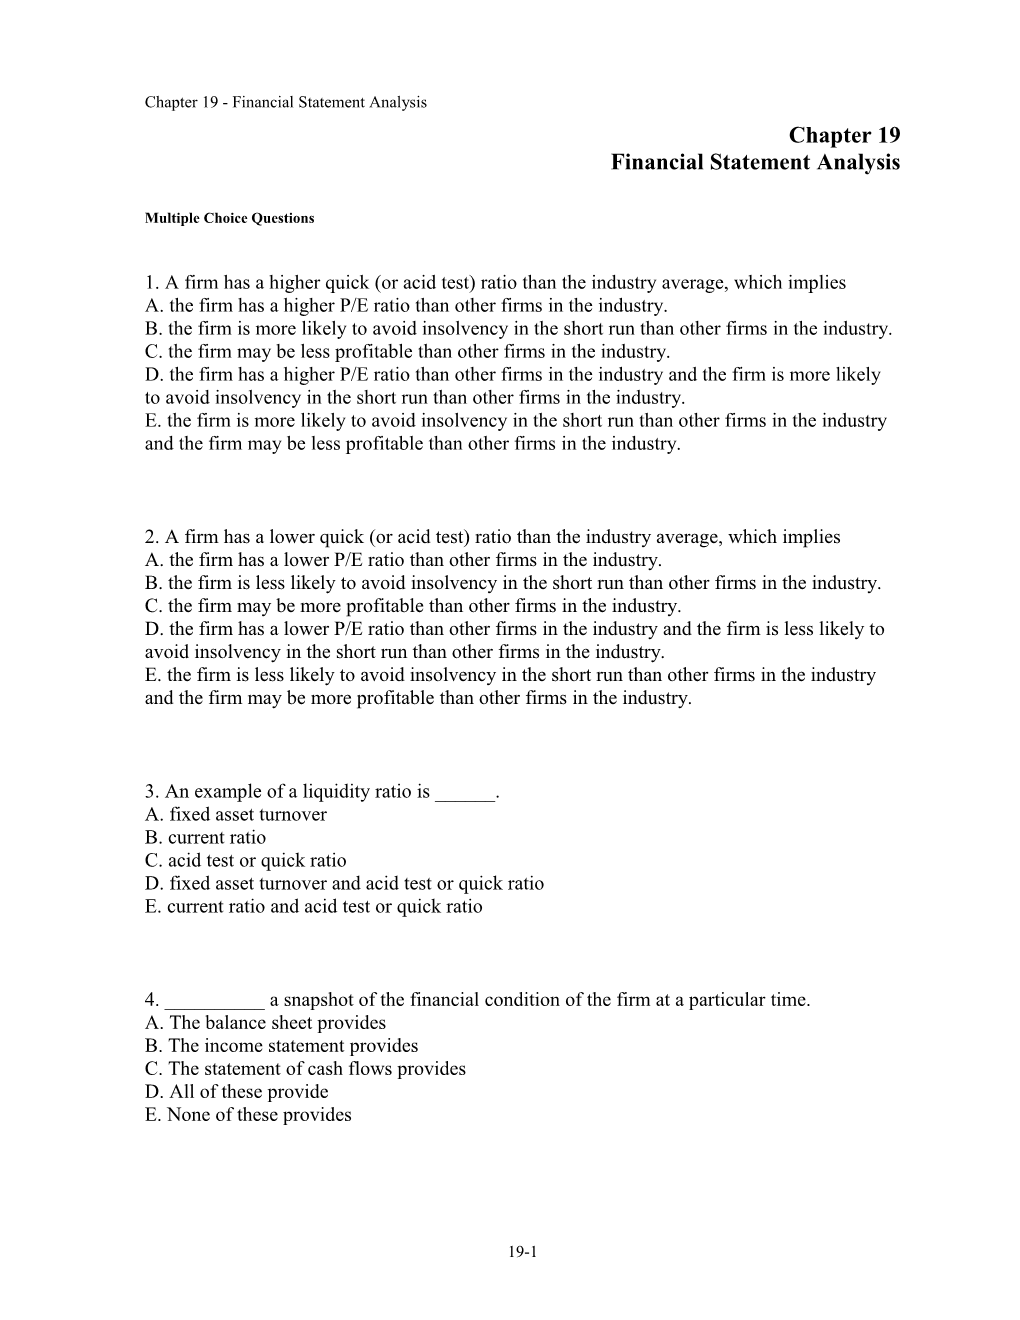 Chapter 19 Financial Statement Analysis